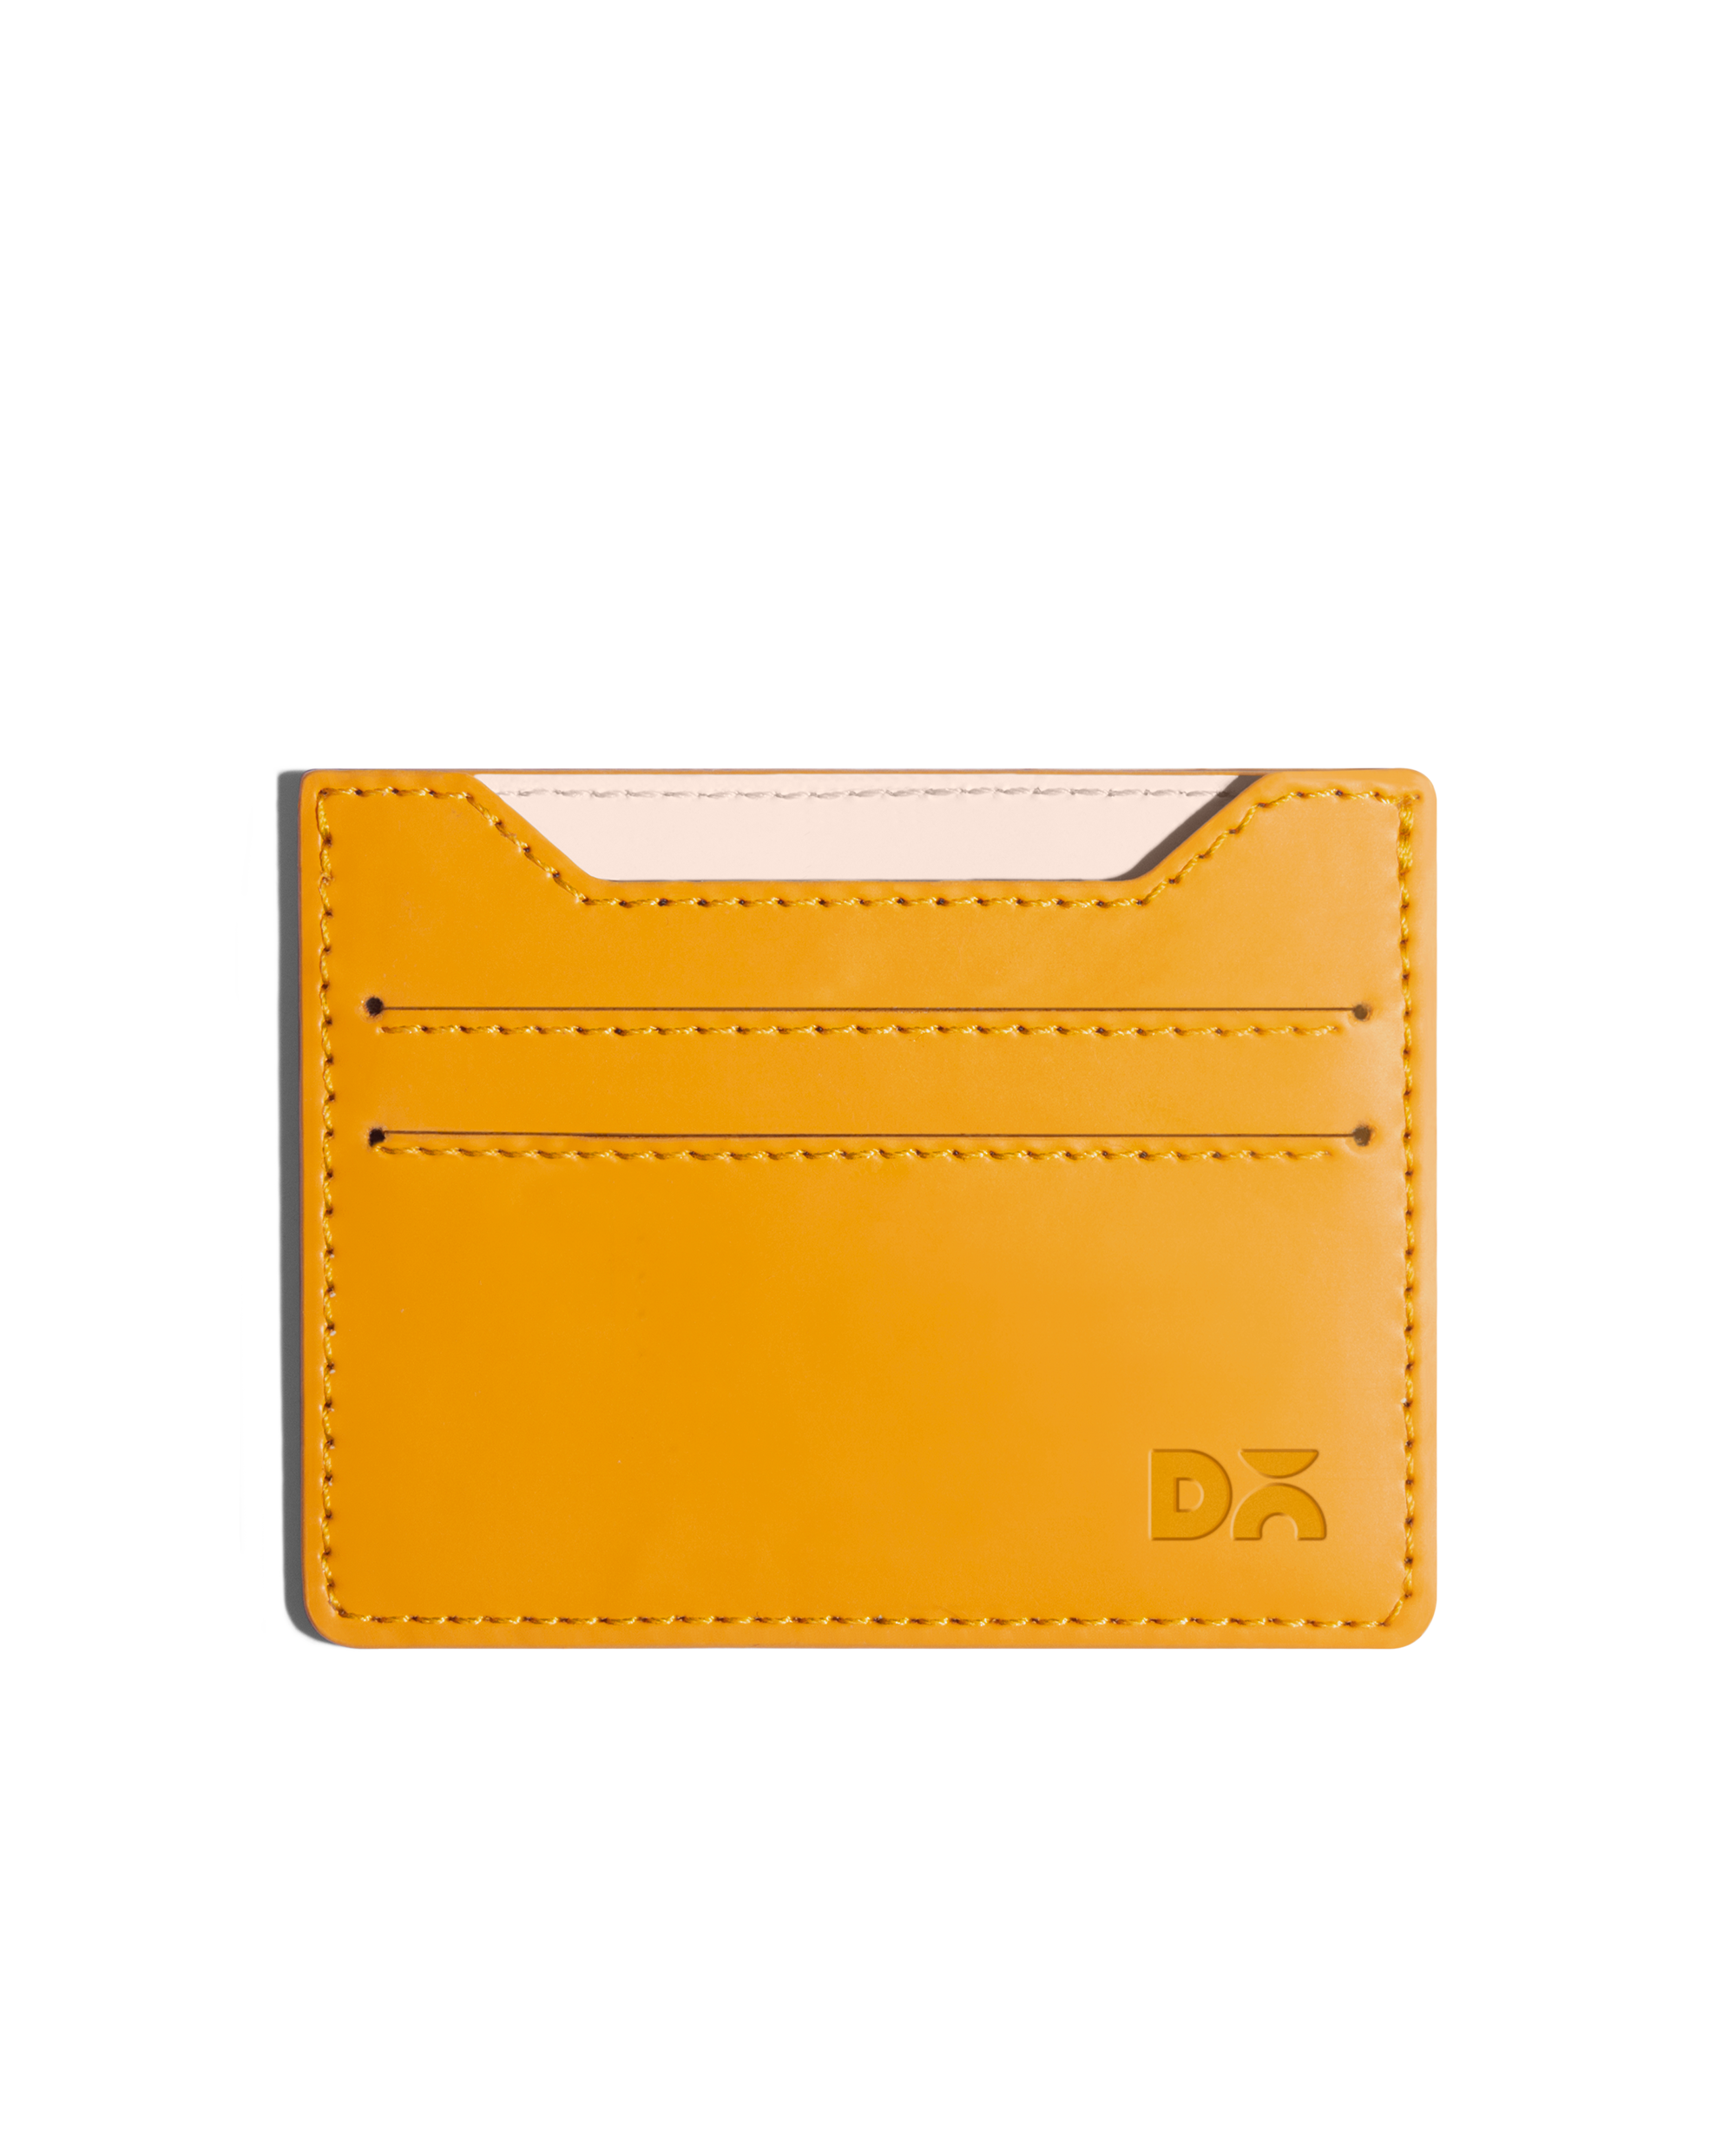 Veg Tanned Leather Artisanal Luxe Special Card Holder - Handcrafted Lu